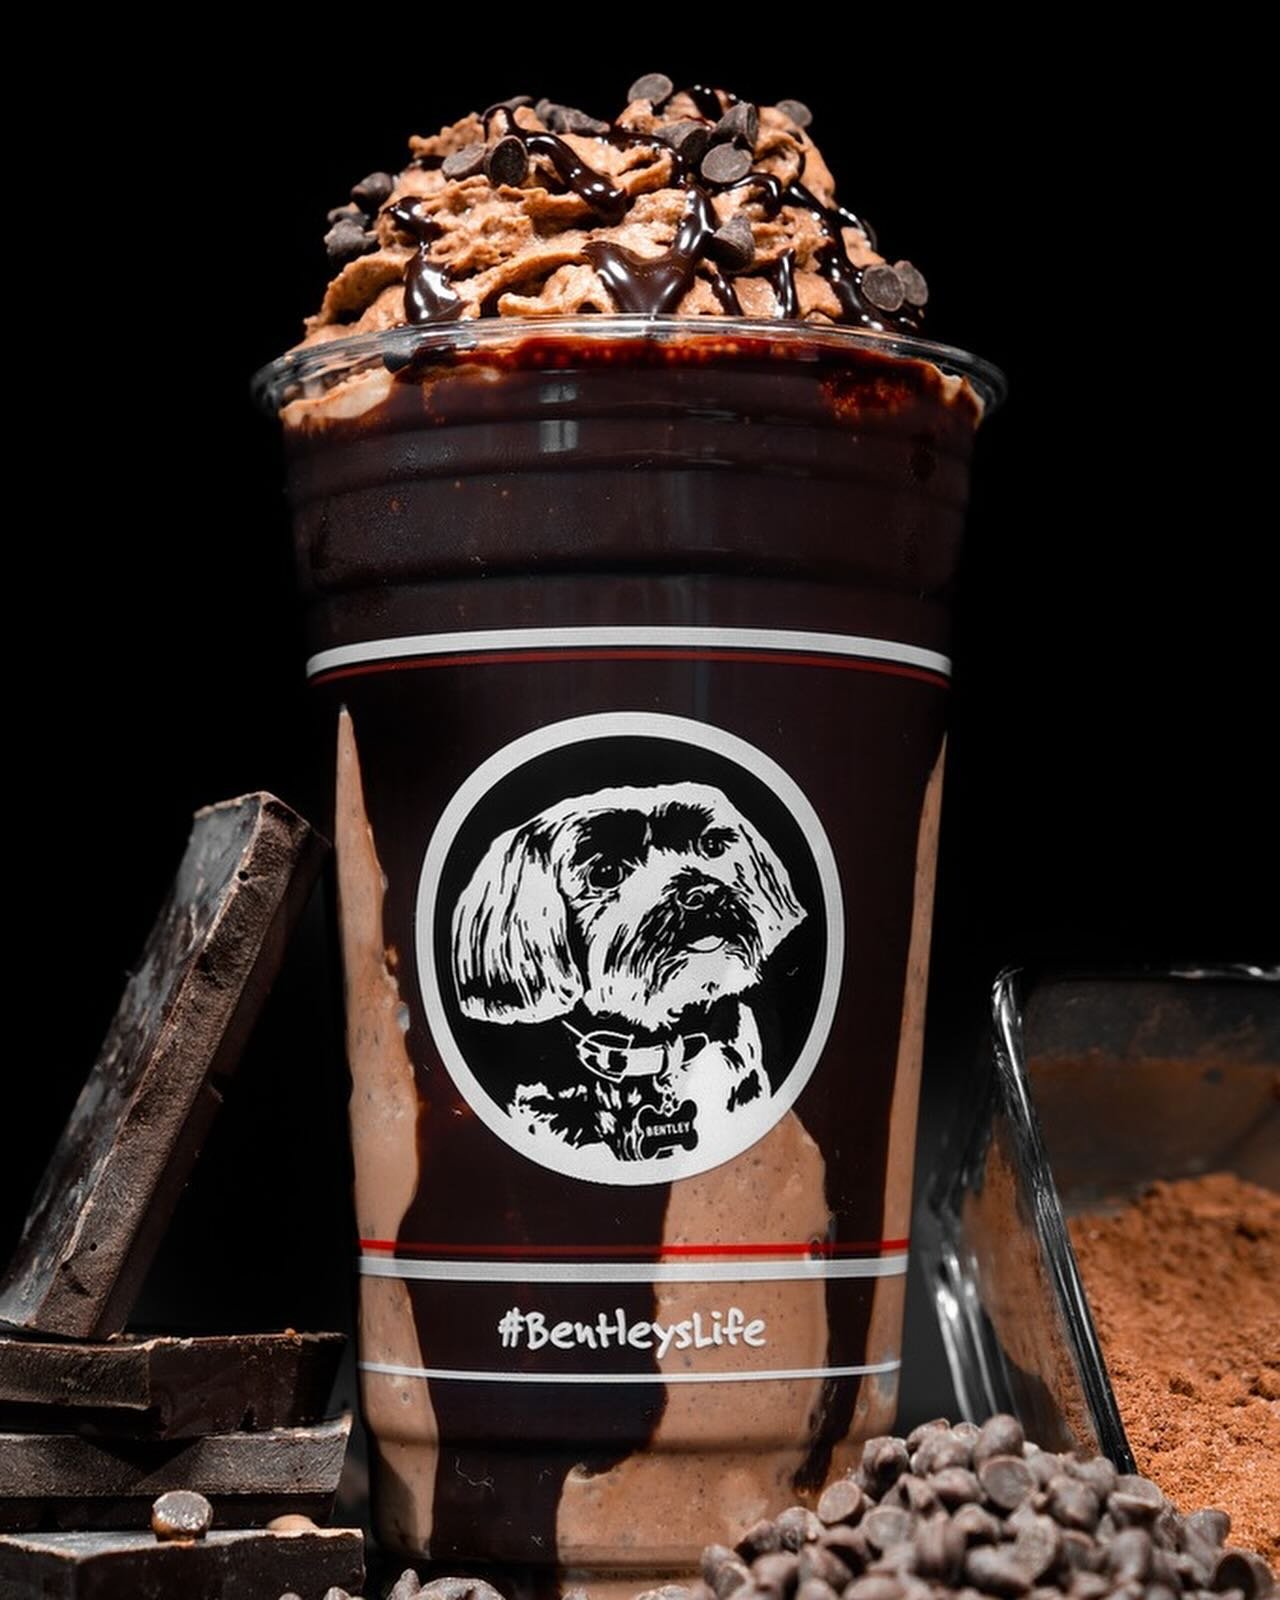 DEATH BY CHOCOLATE IS BACK! ☠️🍫
For the month of May only, we are bringing Death by Chocolate back!! 🤎

House-made chocolate whipped cream, mini chocolate chips, rich chocolate drizzle, and house-made cocoa powder inside. 

Order it blended with ou